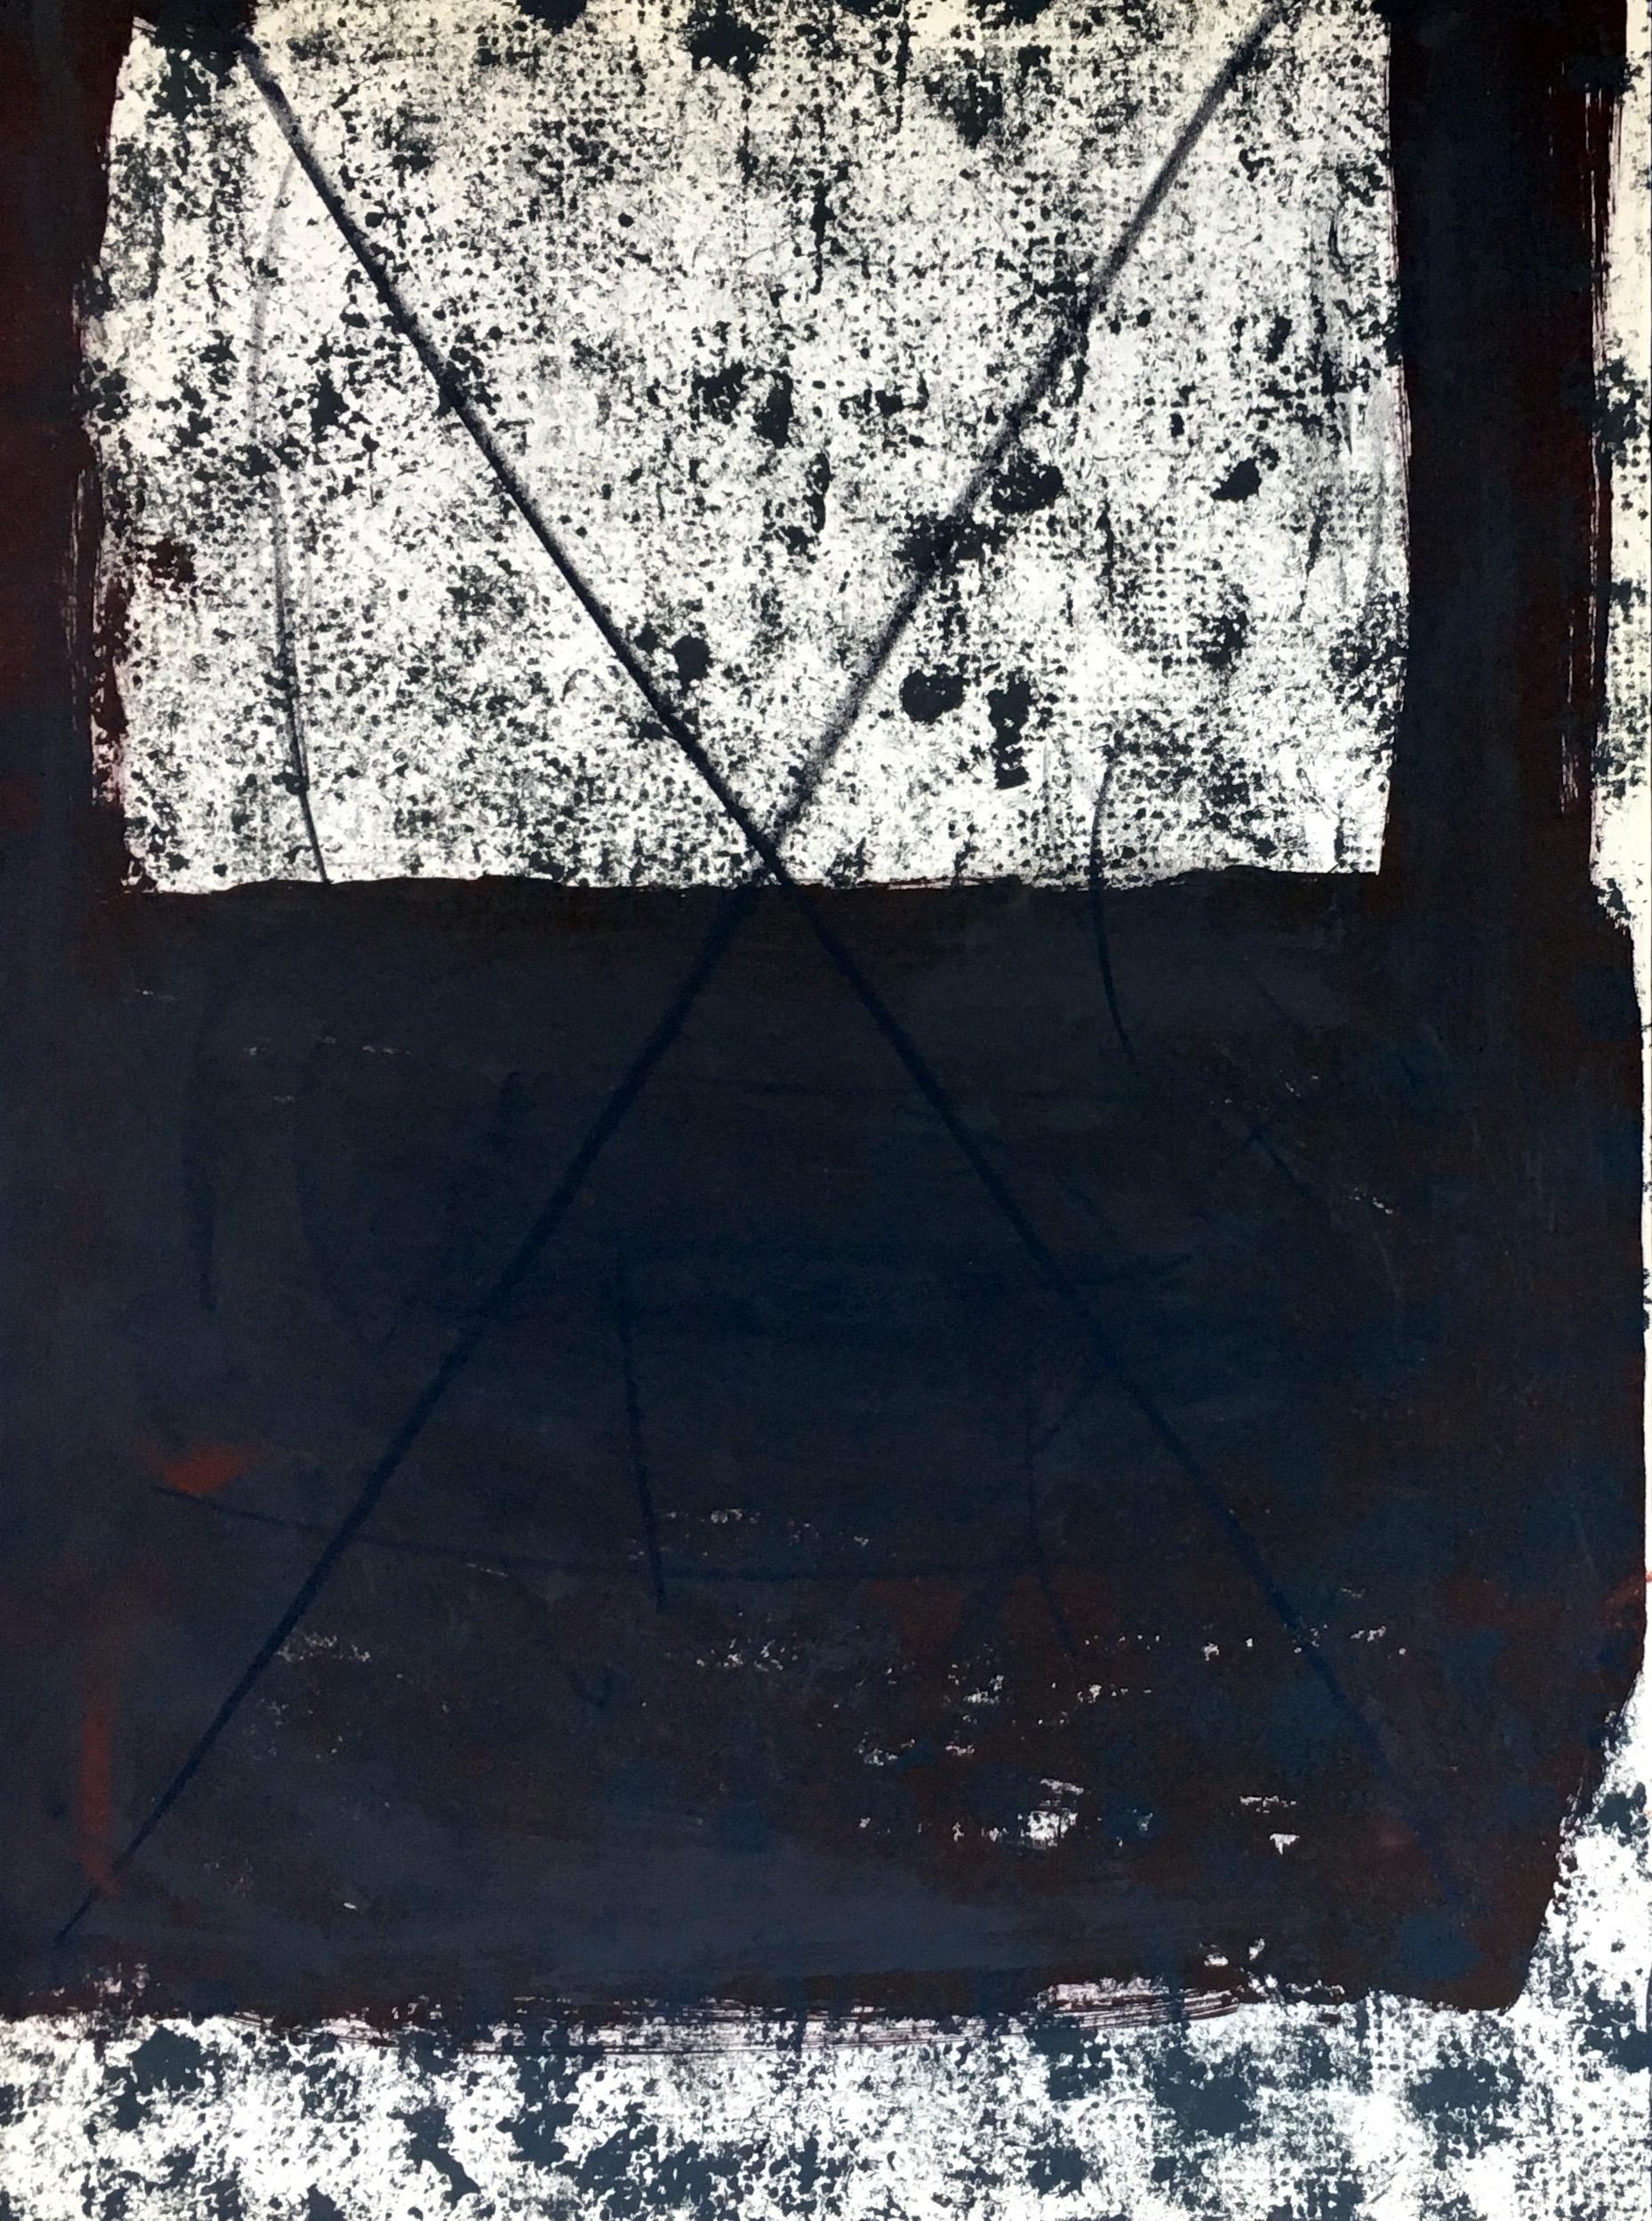 Antoni Tàpies Lithograph 1967 from Derriere Le Miroir:

Lithograph in colors; 1967.
11 x 15 inches.
Very good overall vintage condition.
Unsigned from an edition of unknown. Sold unframed.

Antoni Tàpies
Over the course of his career in painting,